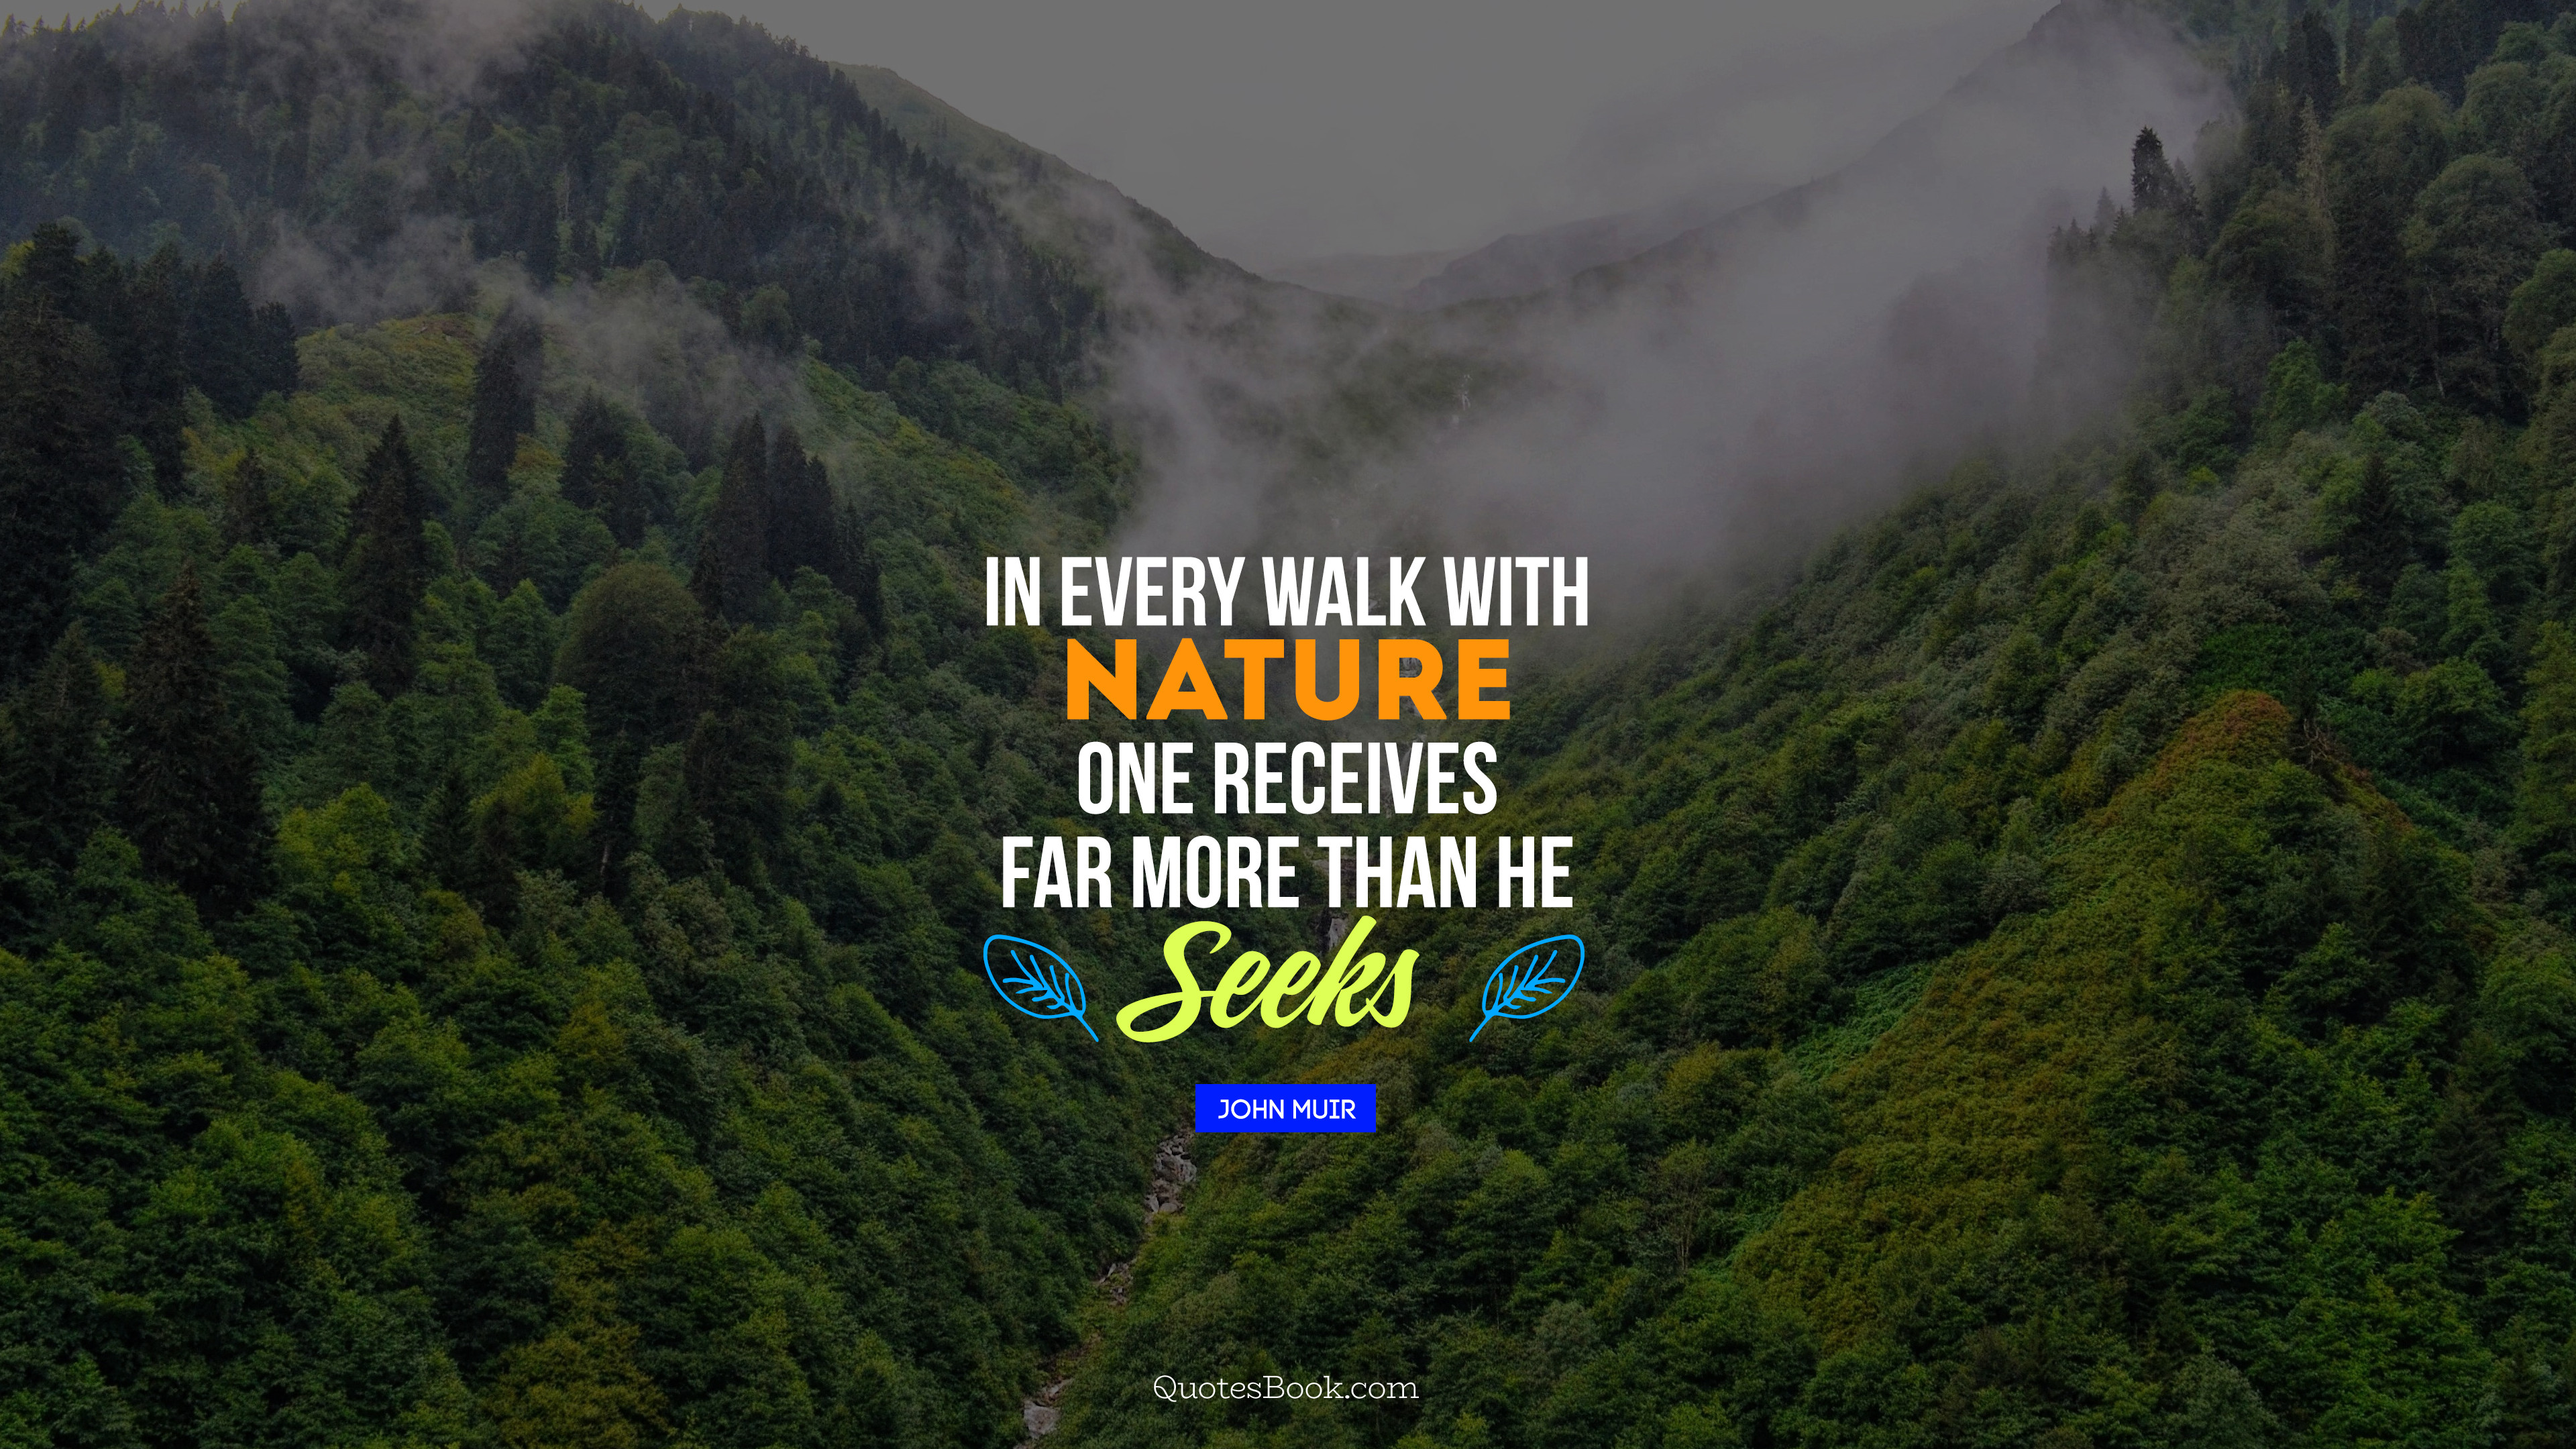 In Every Walk With Nature One Receives Far More Than He Seeks Quote By John Muir Quotesbook